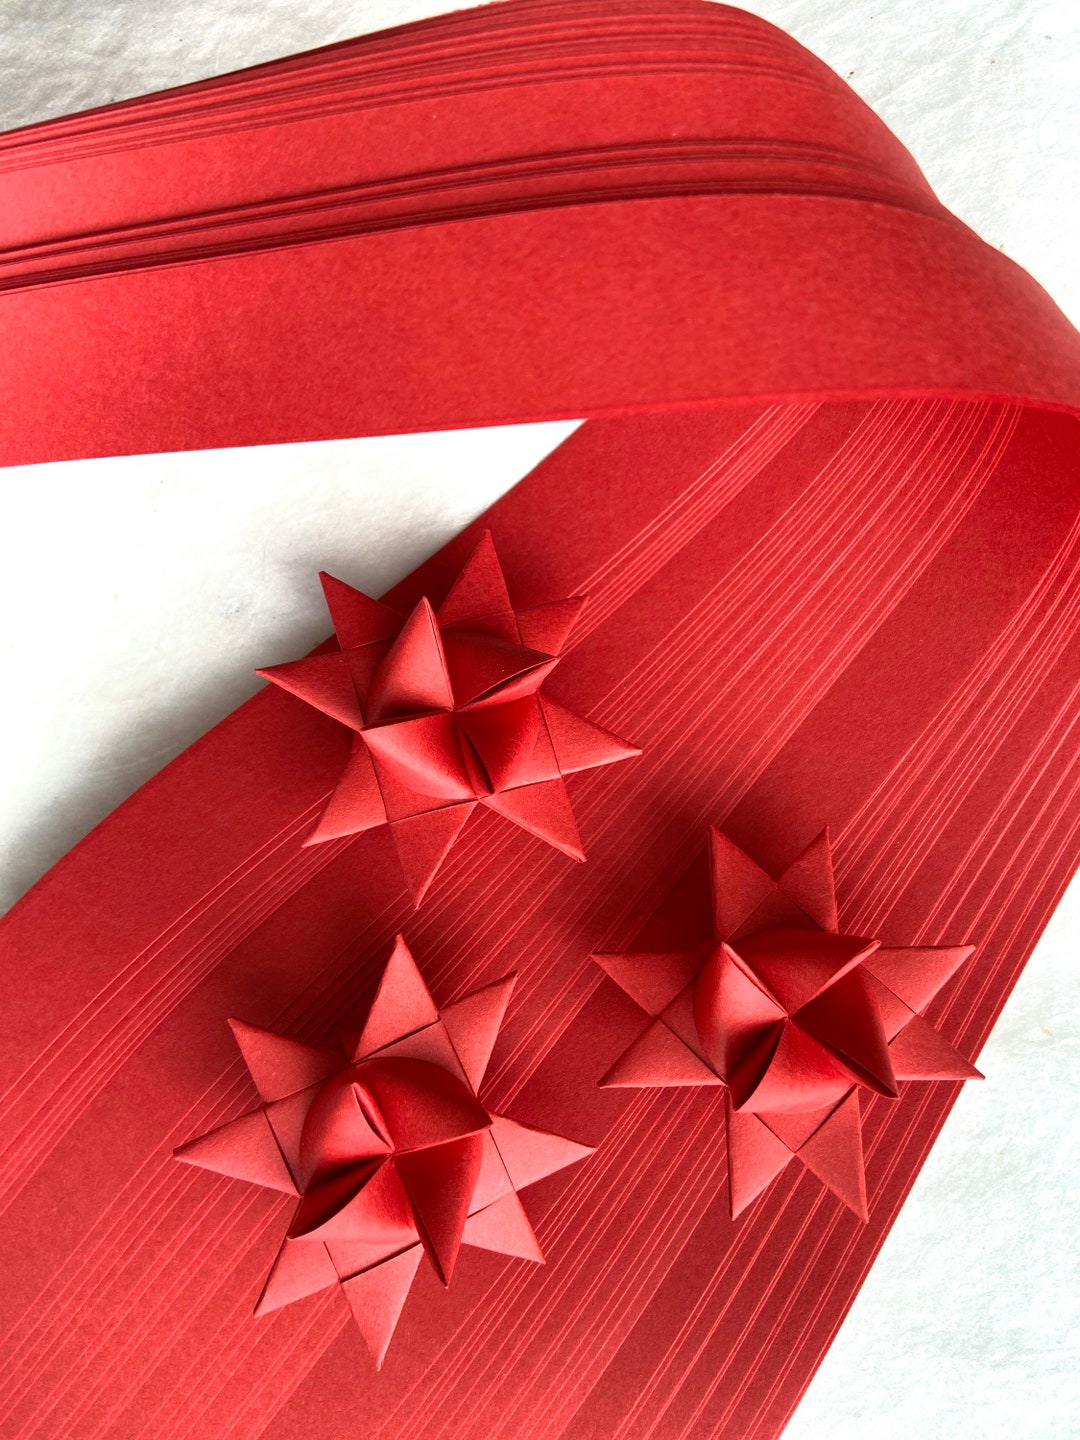  Paper Strips for German, Froebel, Moravian Stars & Weaving  ~3/4 Red, Green, White Holiday : Handmade Products